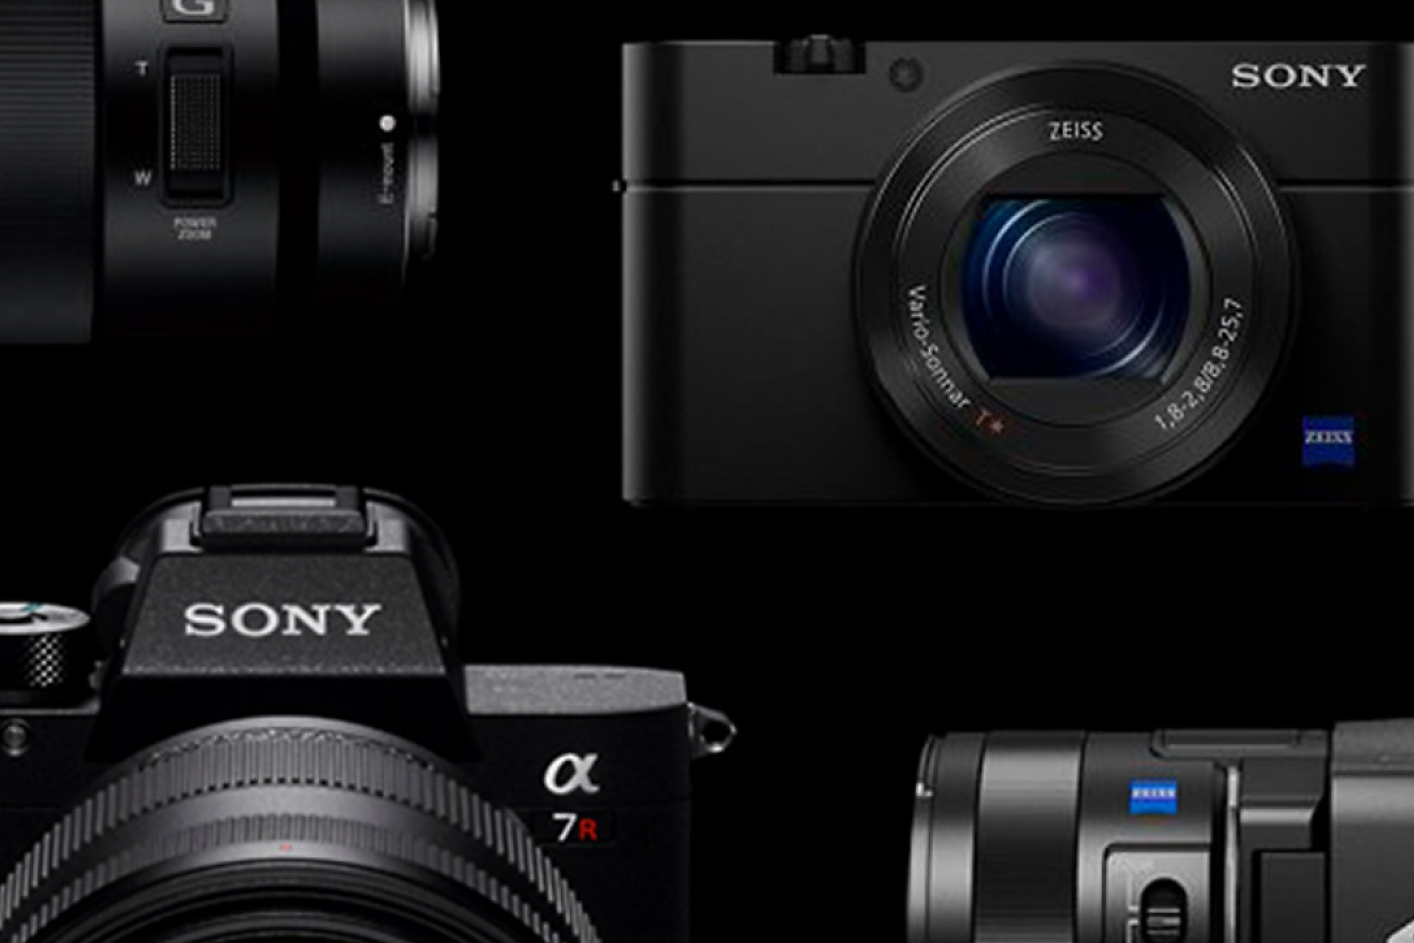 An Alpha lens, Alpha camera, camcorder and compact camera on a black background